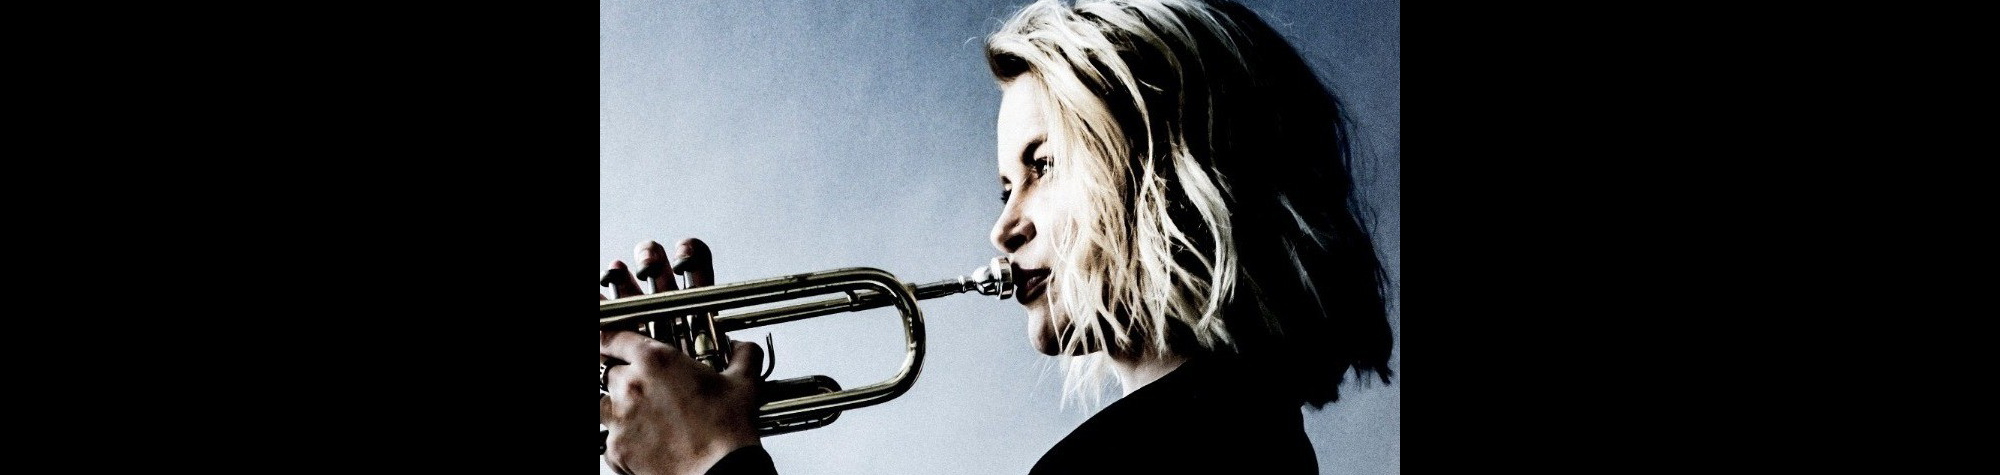 Bria Skonberg Trumpet Interview – The Other Side of the Bell #79